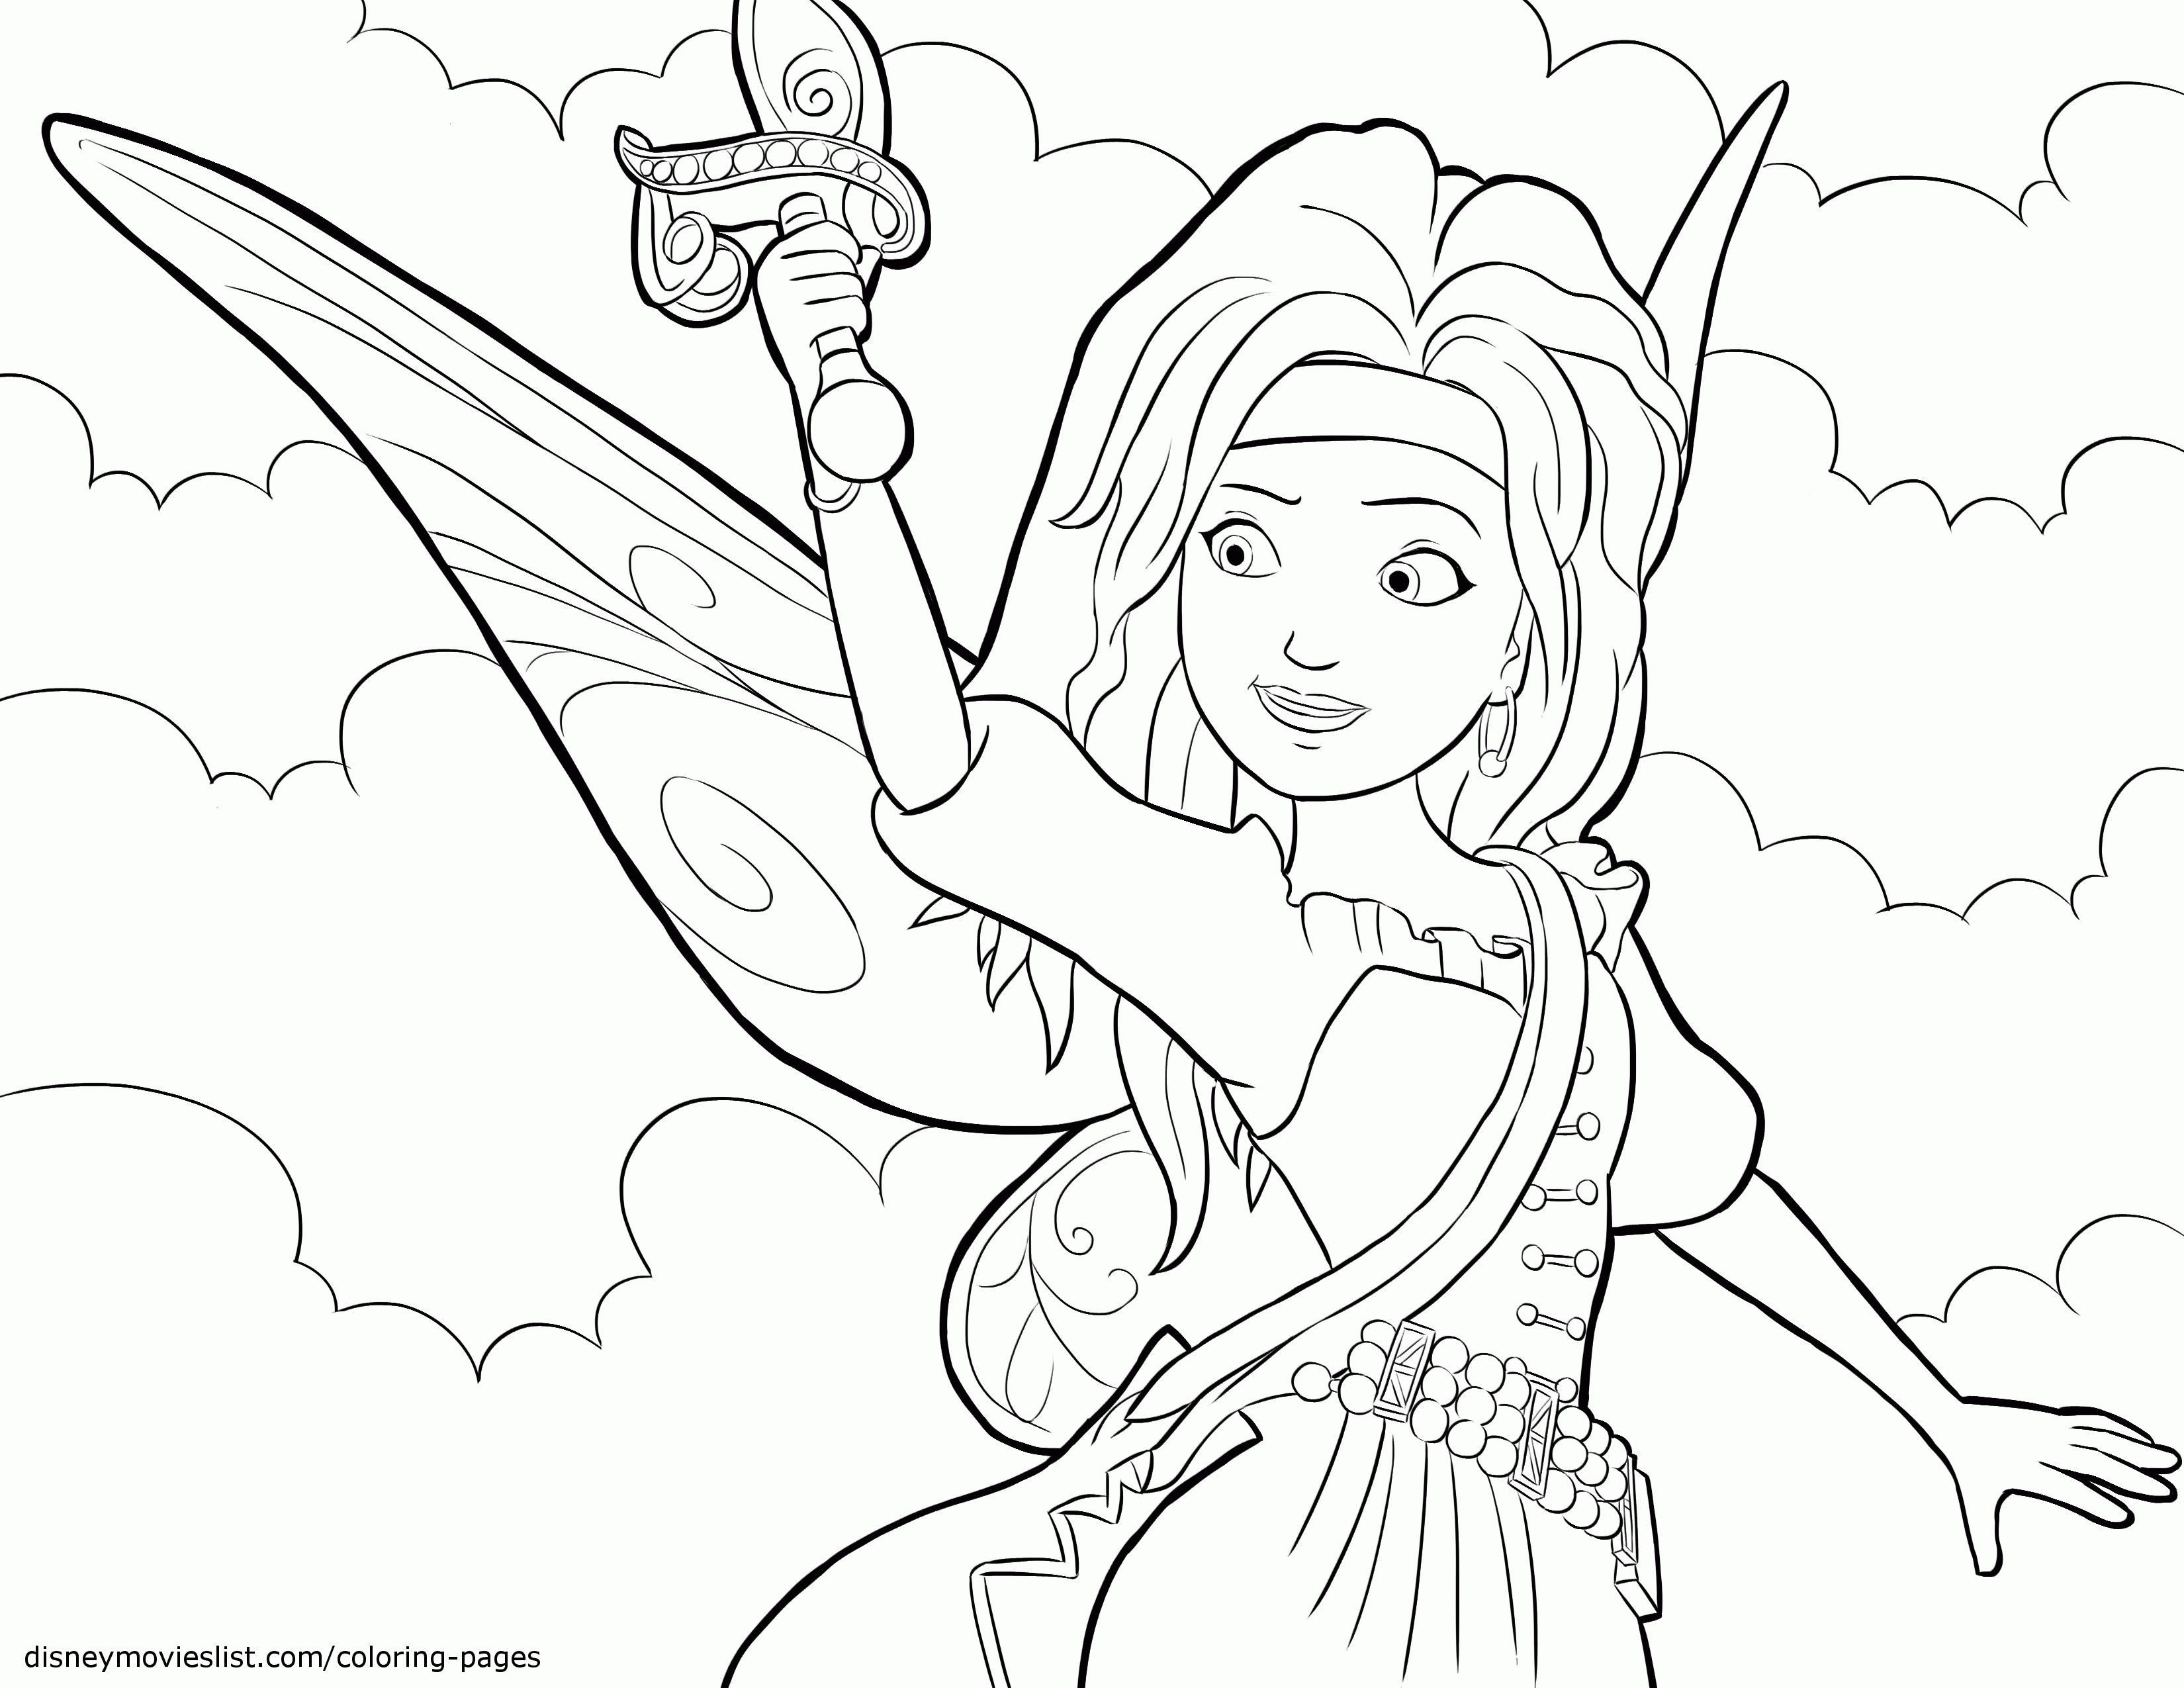 Fairy Coloring Pages Printable (19 Pictures) - Colorine.net | 25402